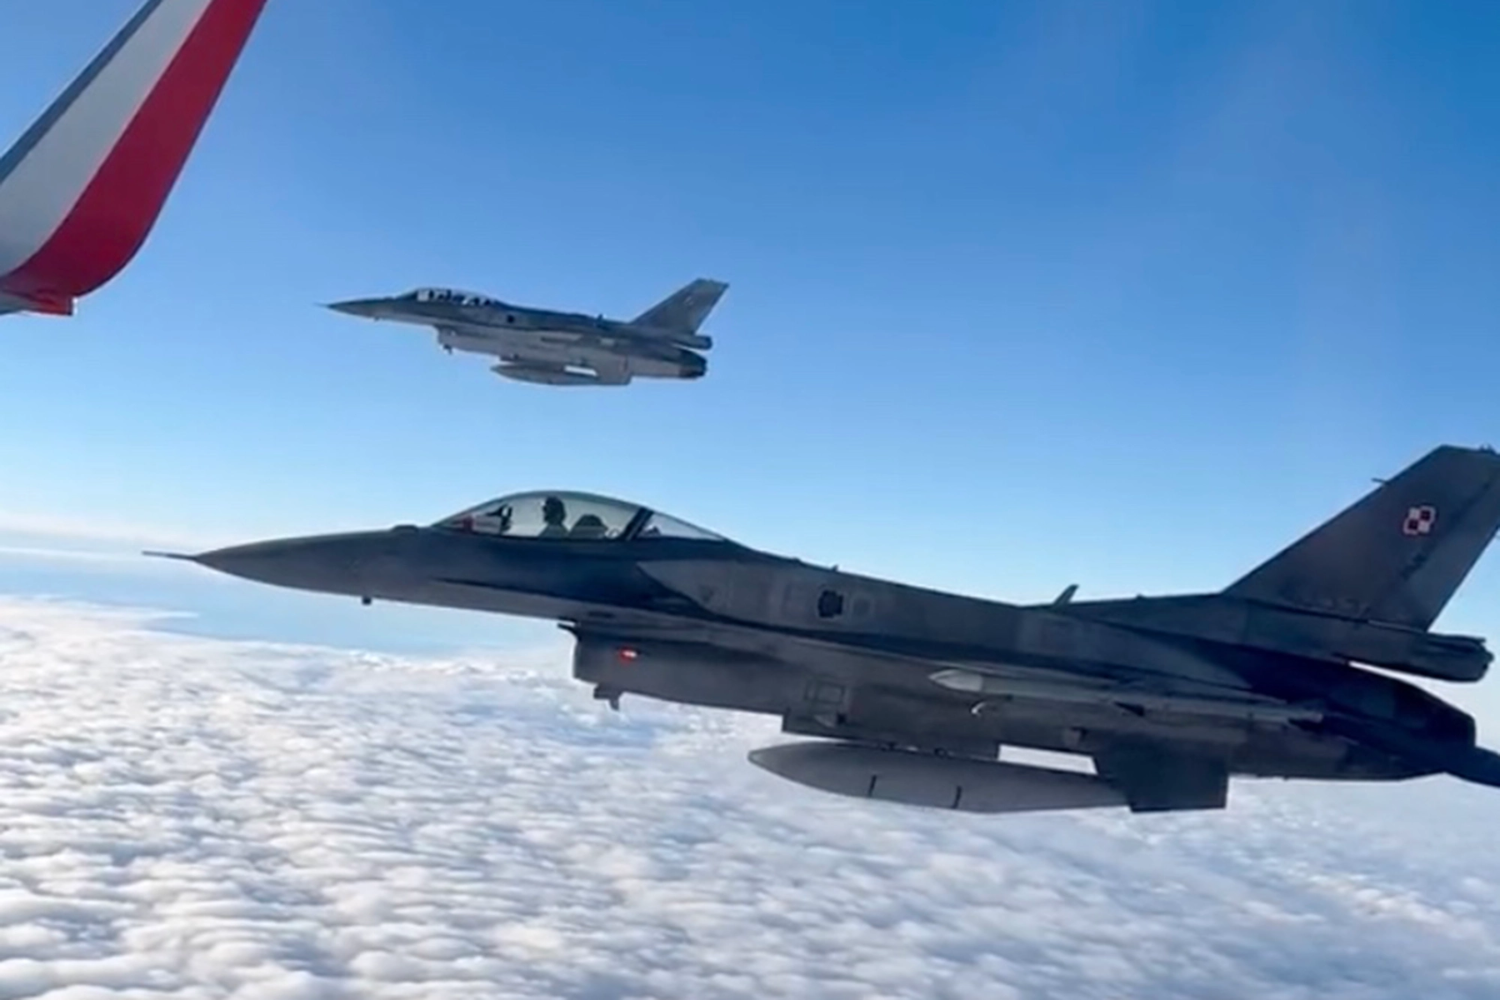 Poland Flys To The World Cup In Style, Escorted By F16 Fighter Jets